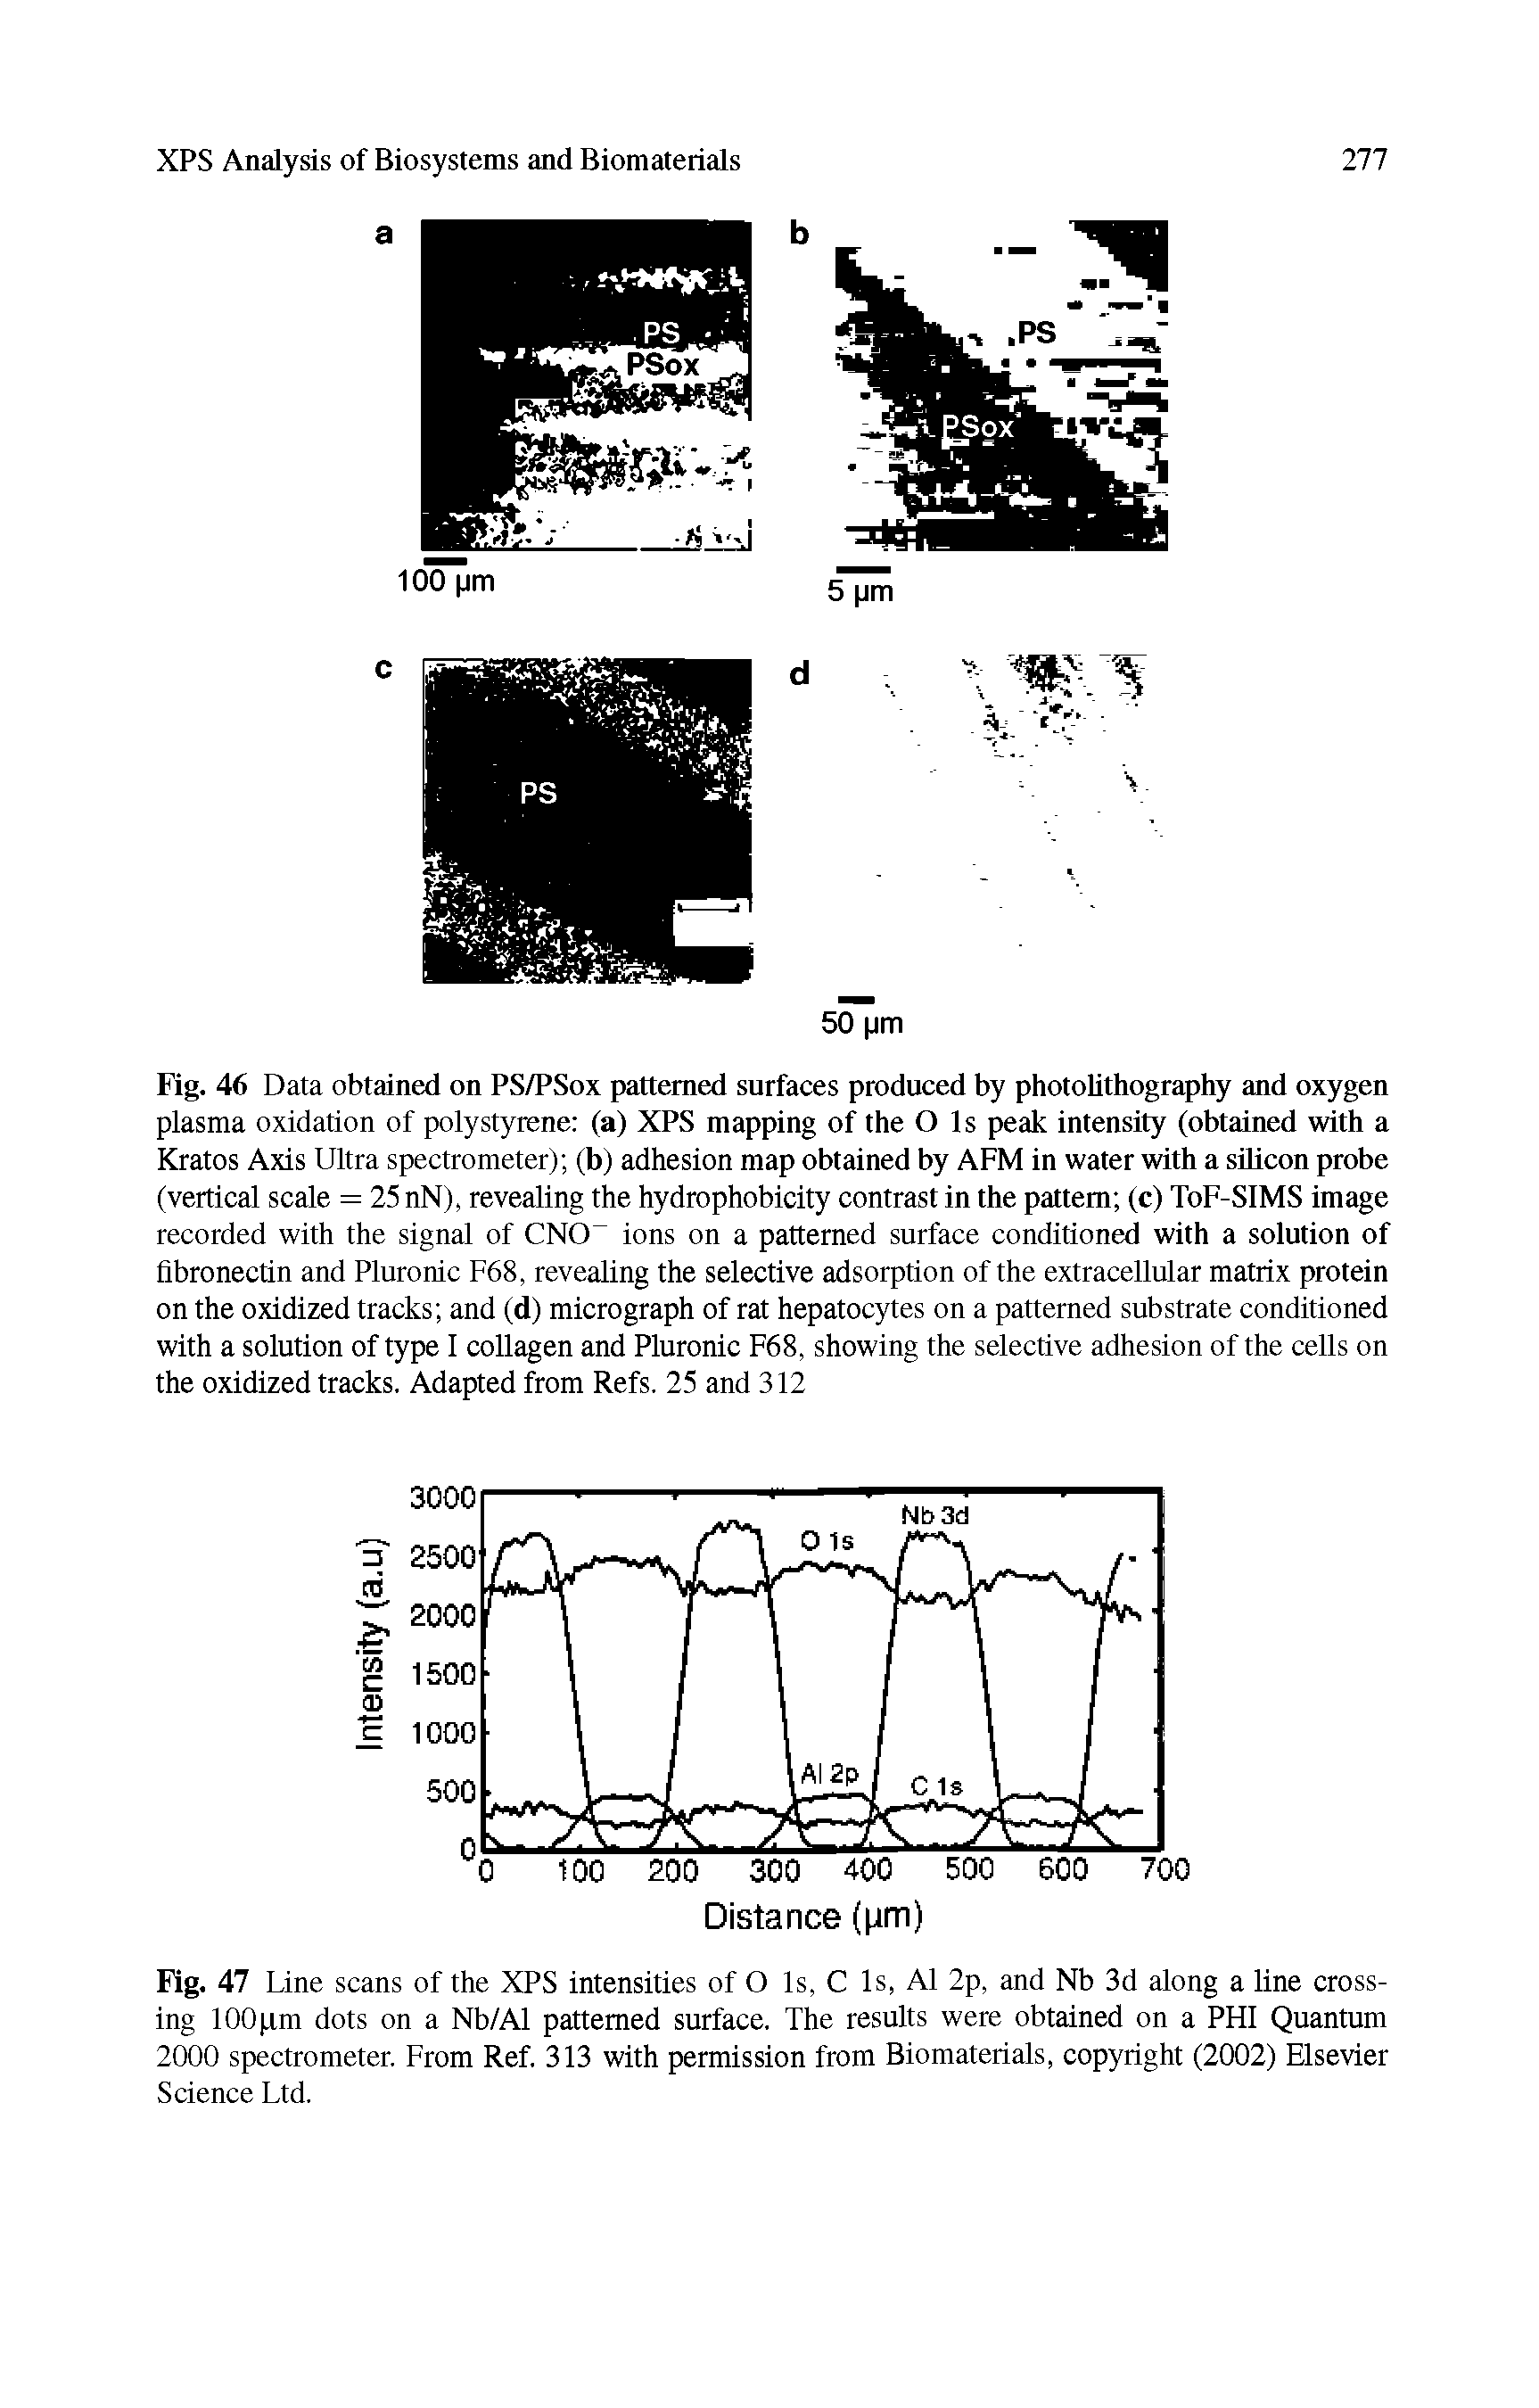 Fig. 46 Data obtained on PS/PSox patterned surfaces produced by photolithography and oxygen plasma oxidation of polystyrene (a) XPS mapping of the O Is peak intensity (obtained with a Kratos Axis Ultra spectrometer) (b) adhesion map obtained by AFM in water with a sUicon probe (vertical scale = 25 nN), revealing the hydrophobicity contrast in the pattern (c) ToF-SIMS image recorded with the signal of CNO ions on a patterned surface conditioned with a solution of flbronectin and Plutonic F68, revealing the selective adsorption of the extracellular matrix protein on the oxidized tracks and (d) micrograph of rat hepatocytes on a patterned substrate conditioned with a solution of type I collagen and Plutonic F68, showing the selective adhesion of the cells on the oxidized tracks. Adapted from Refs, 25 and 312...